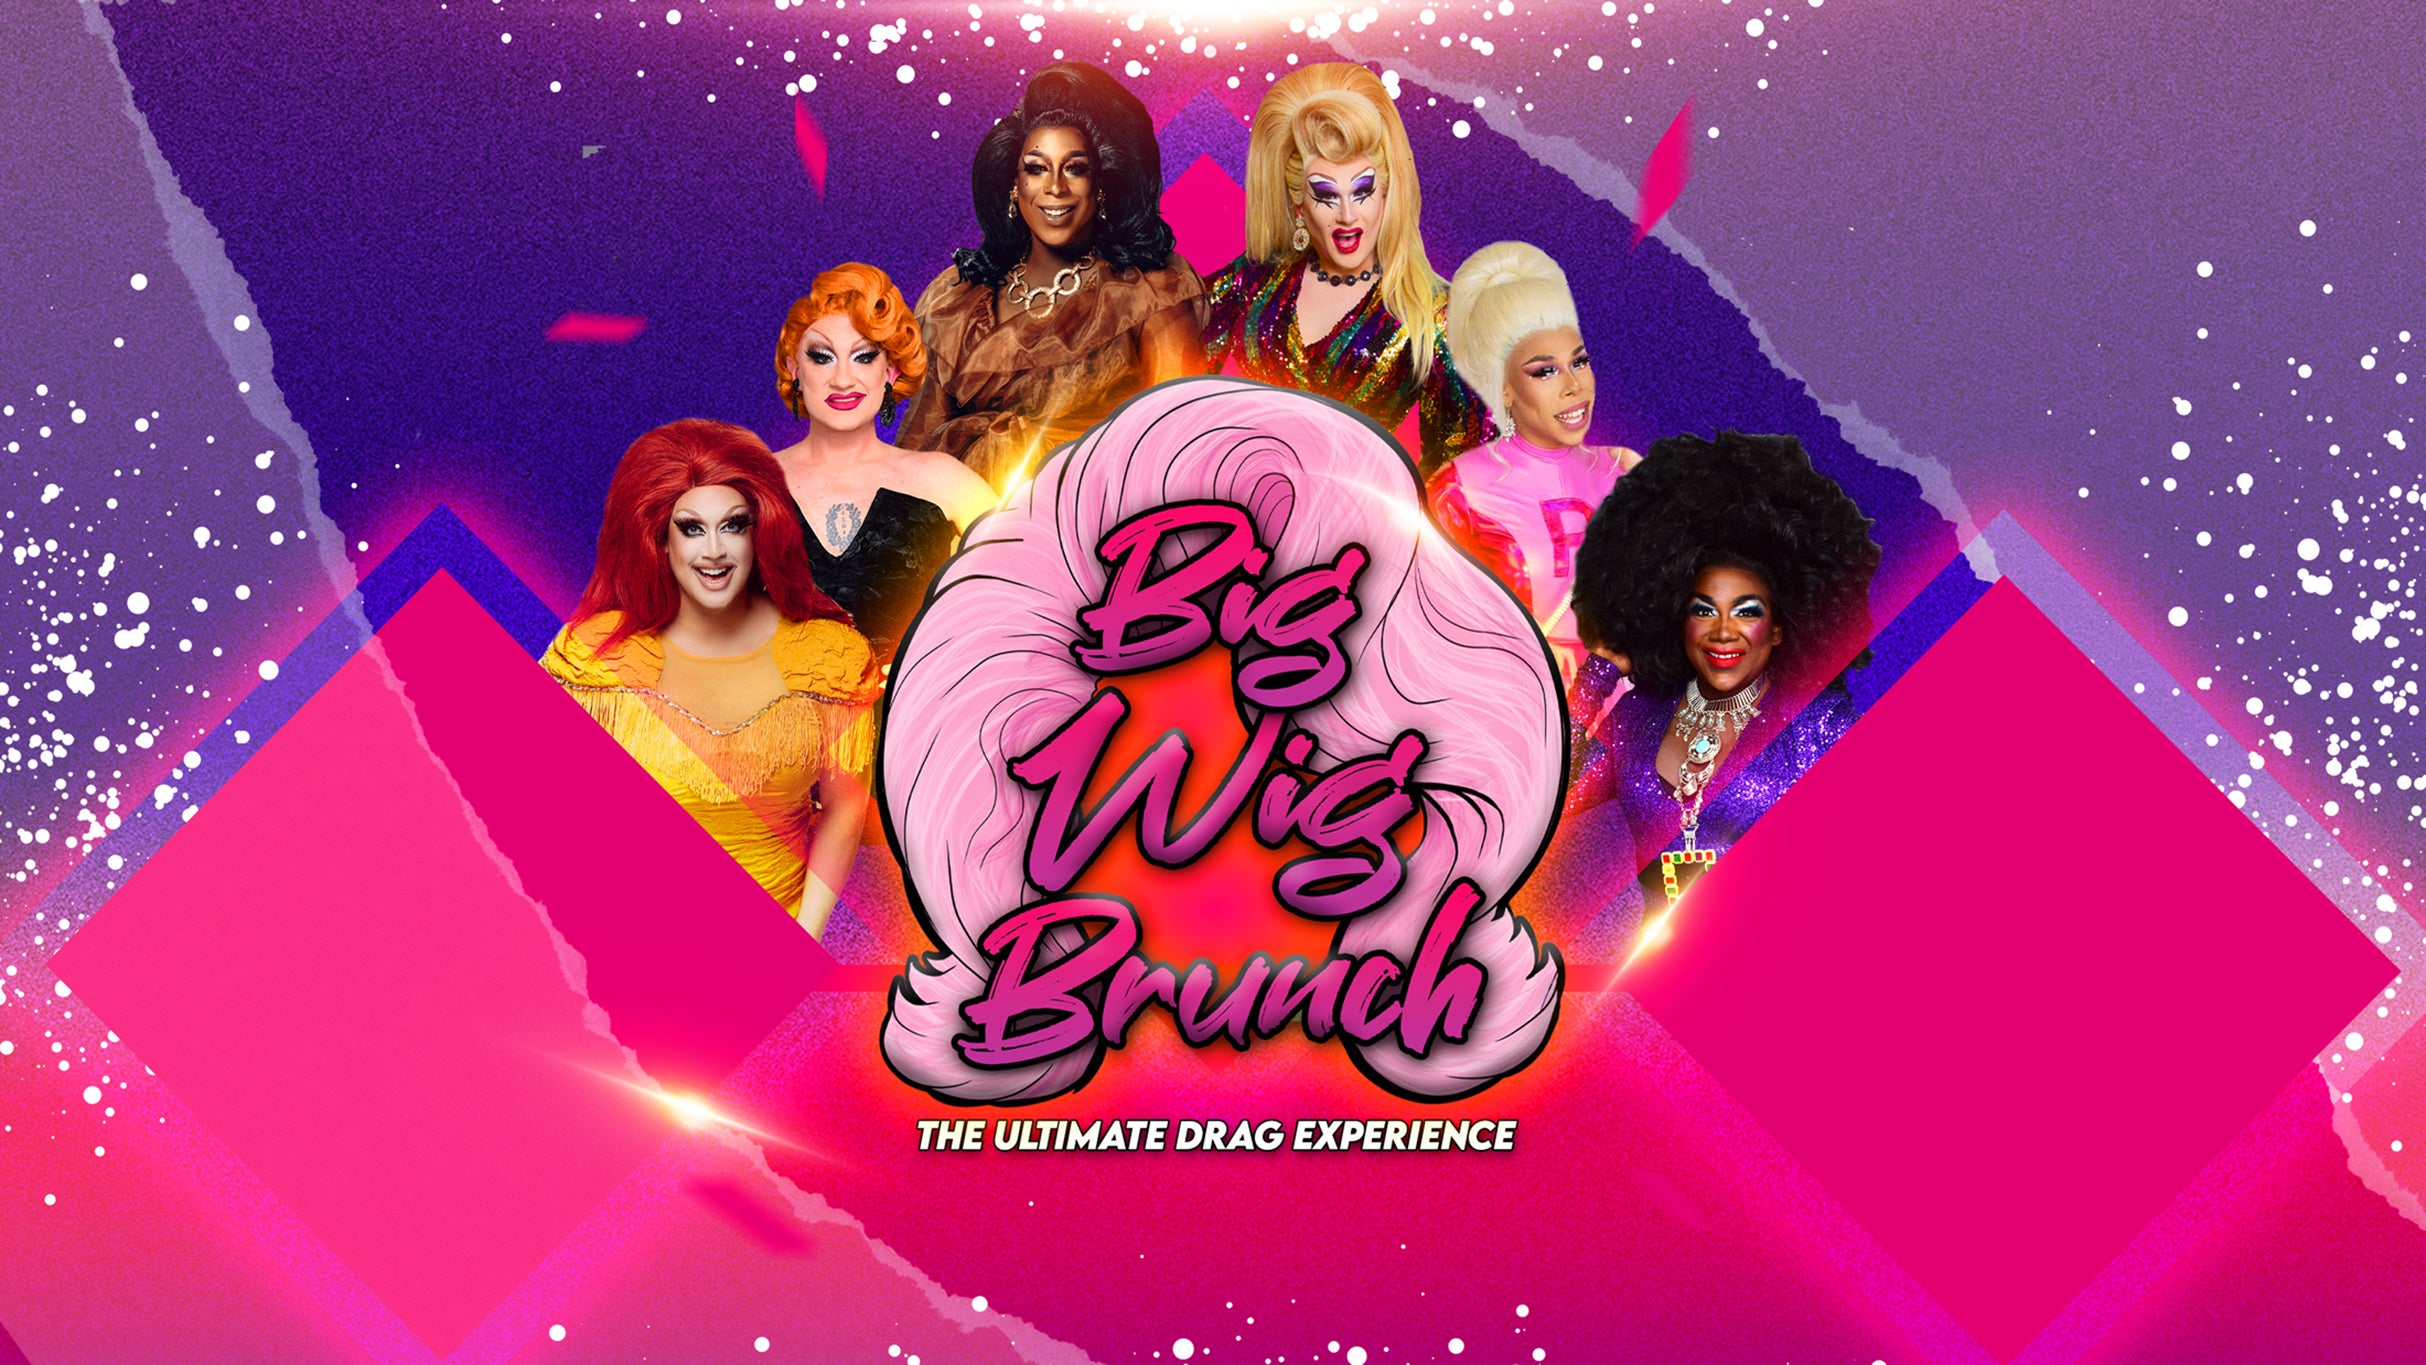 Big Wig ABBA Brunch: The Ultimate Drag Experience